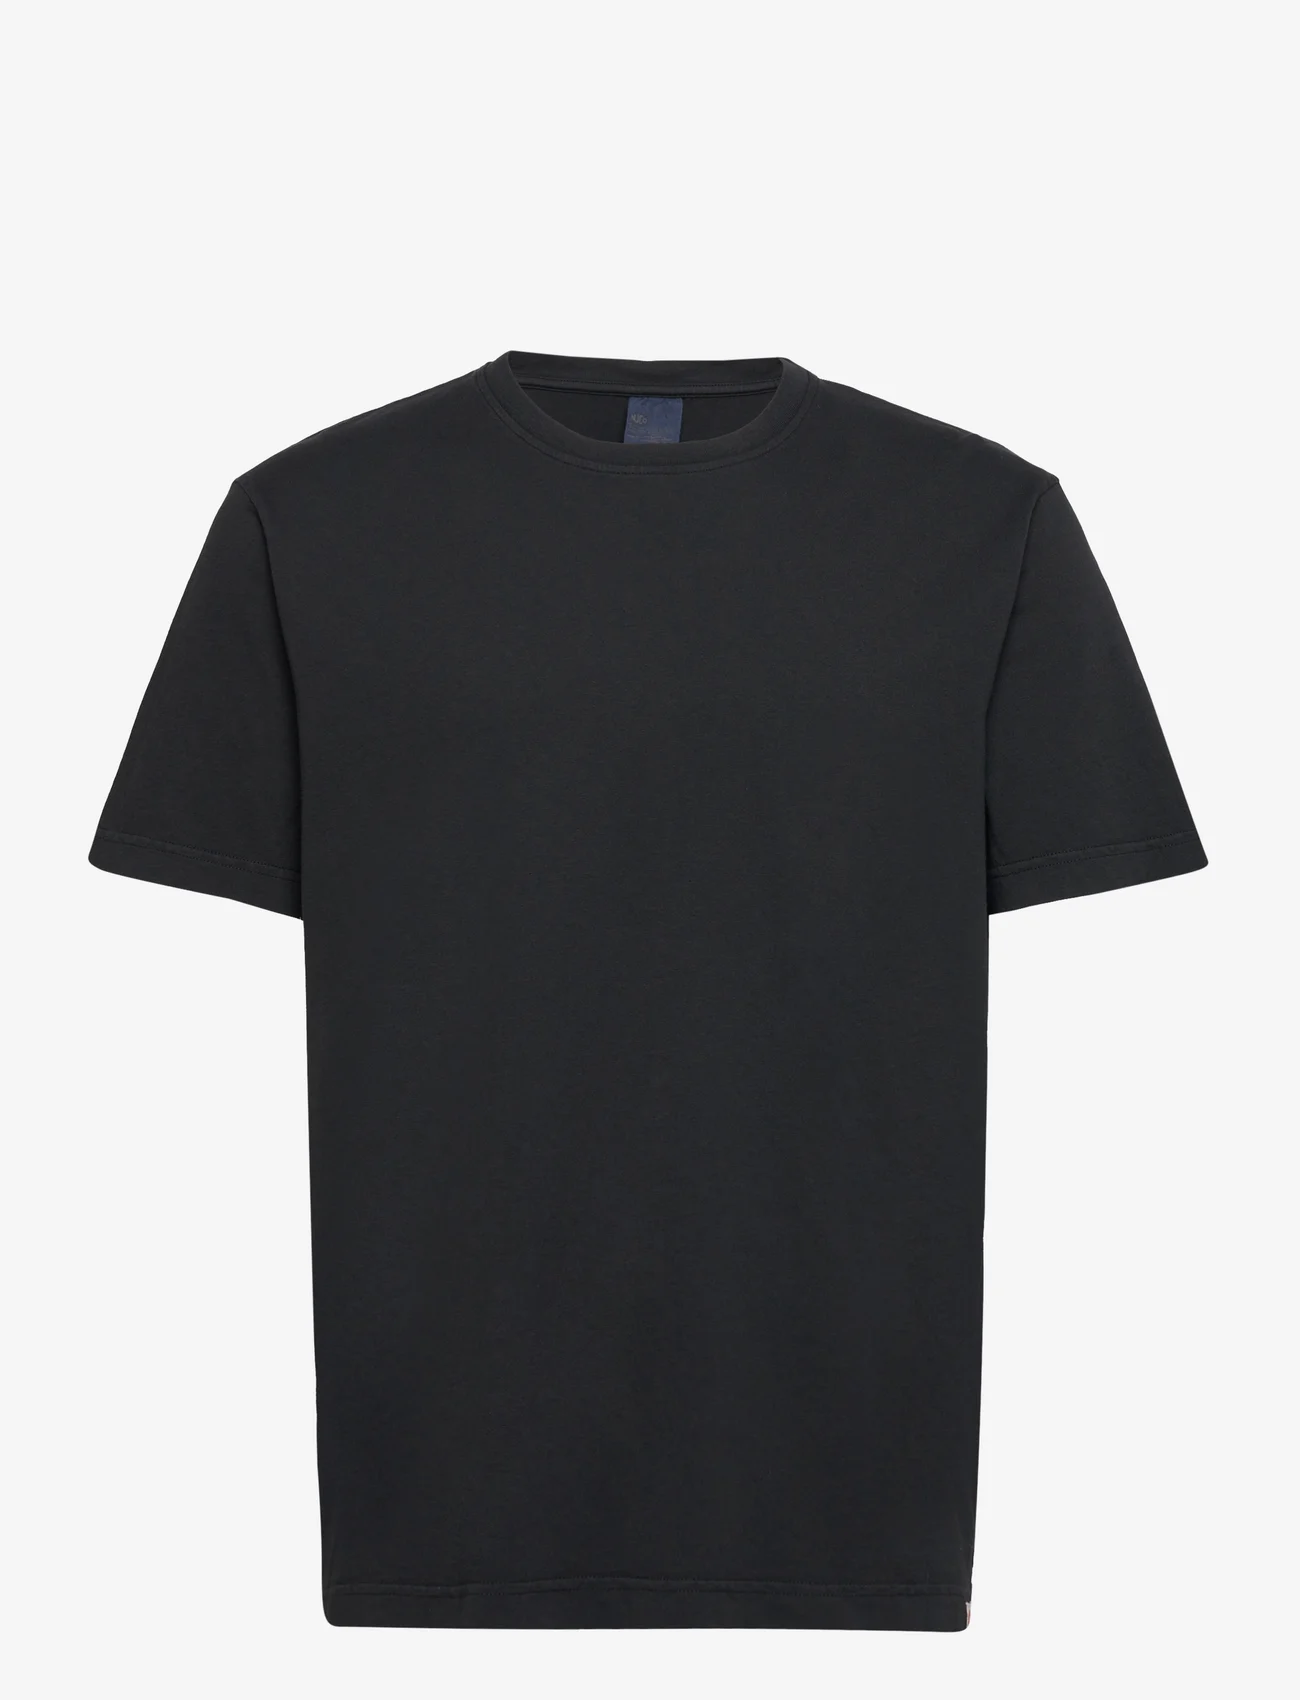 Nudie Jeans - Uno Everyday Tee Black - t-shirts à manches courtes - black - 1